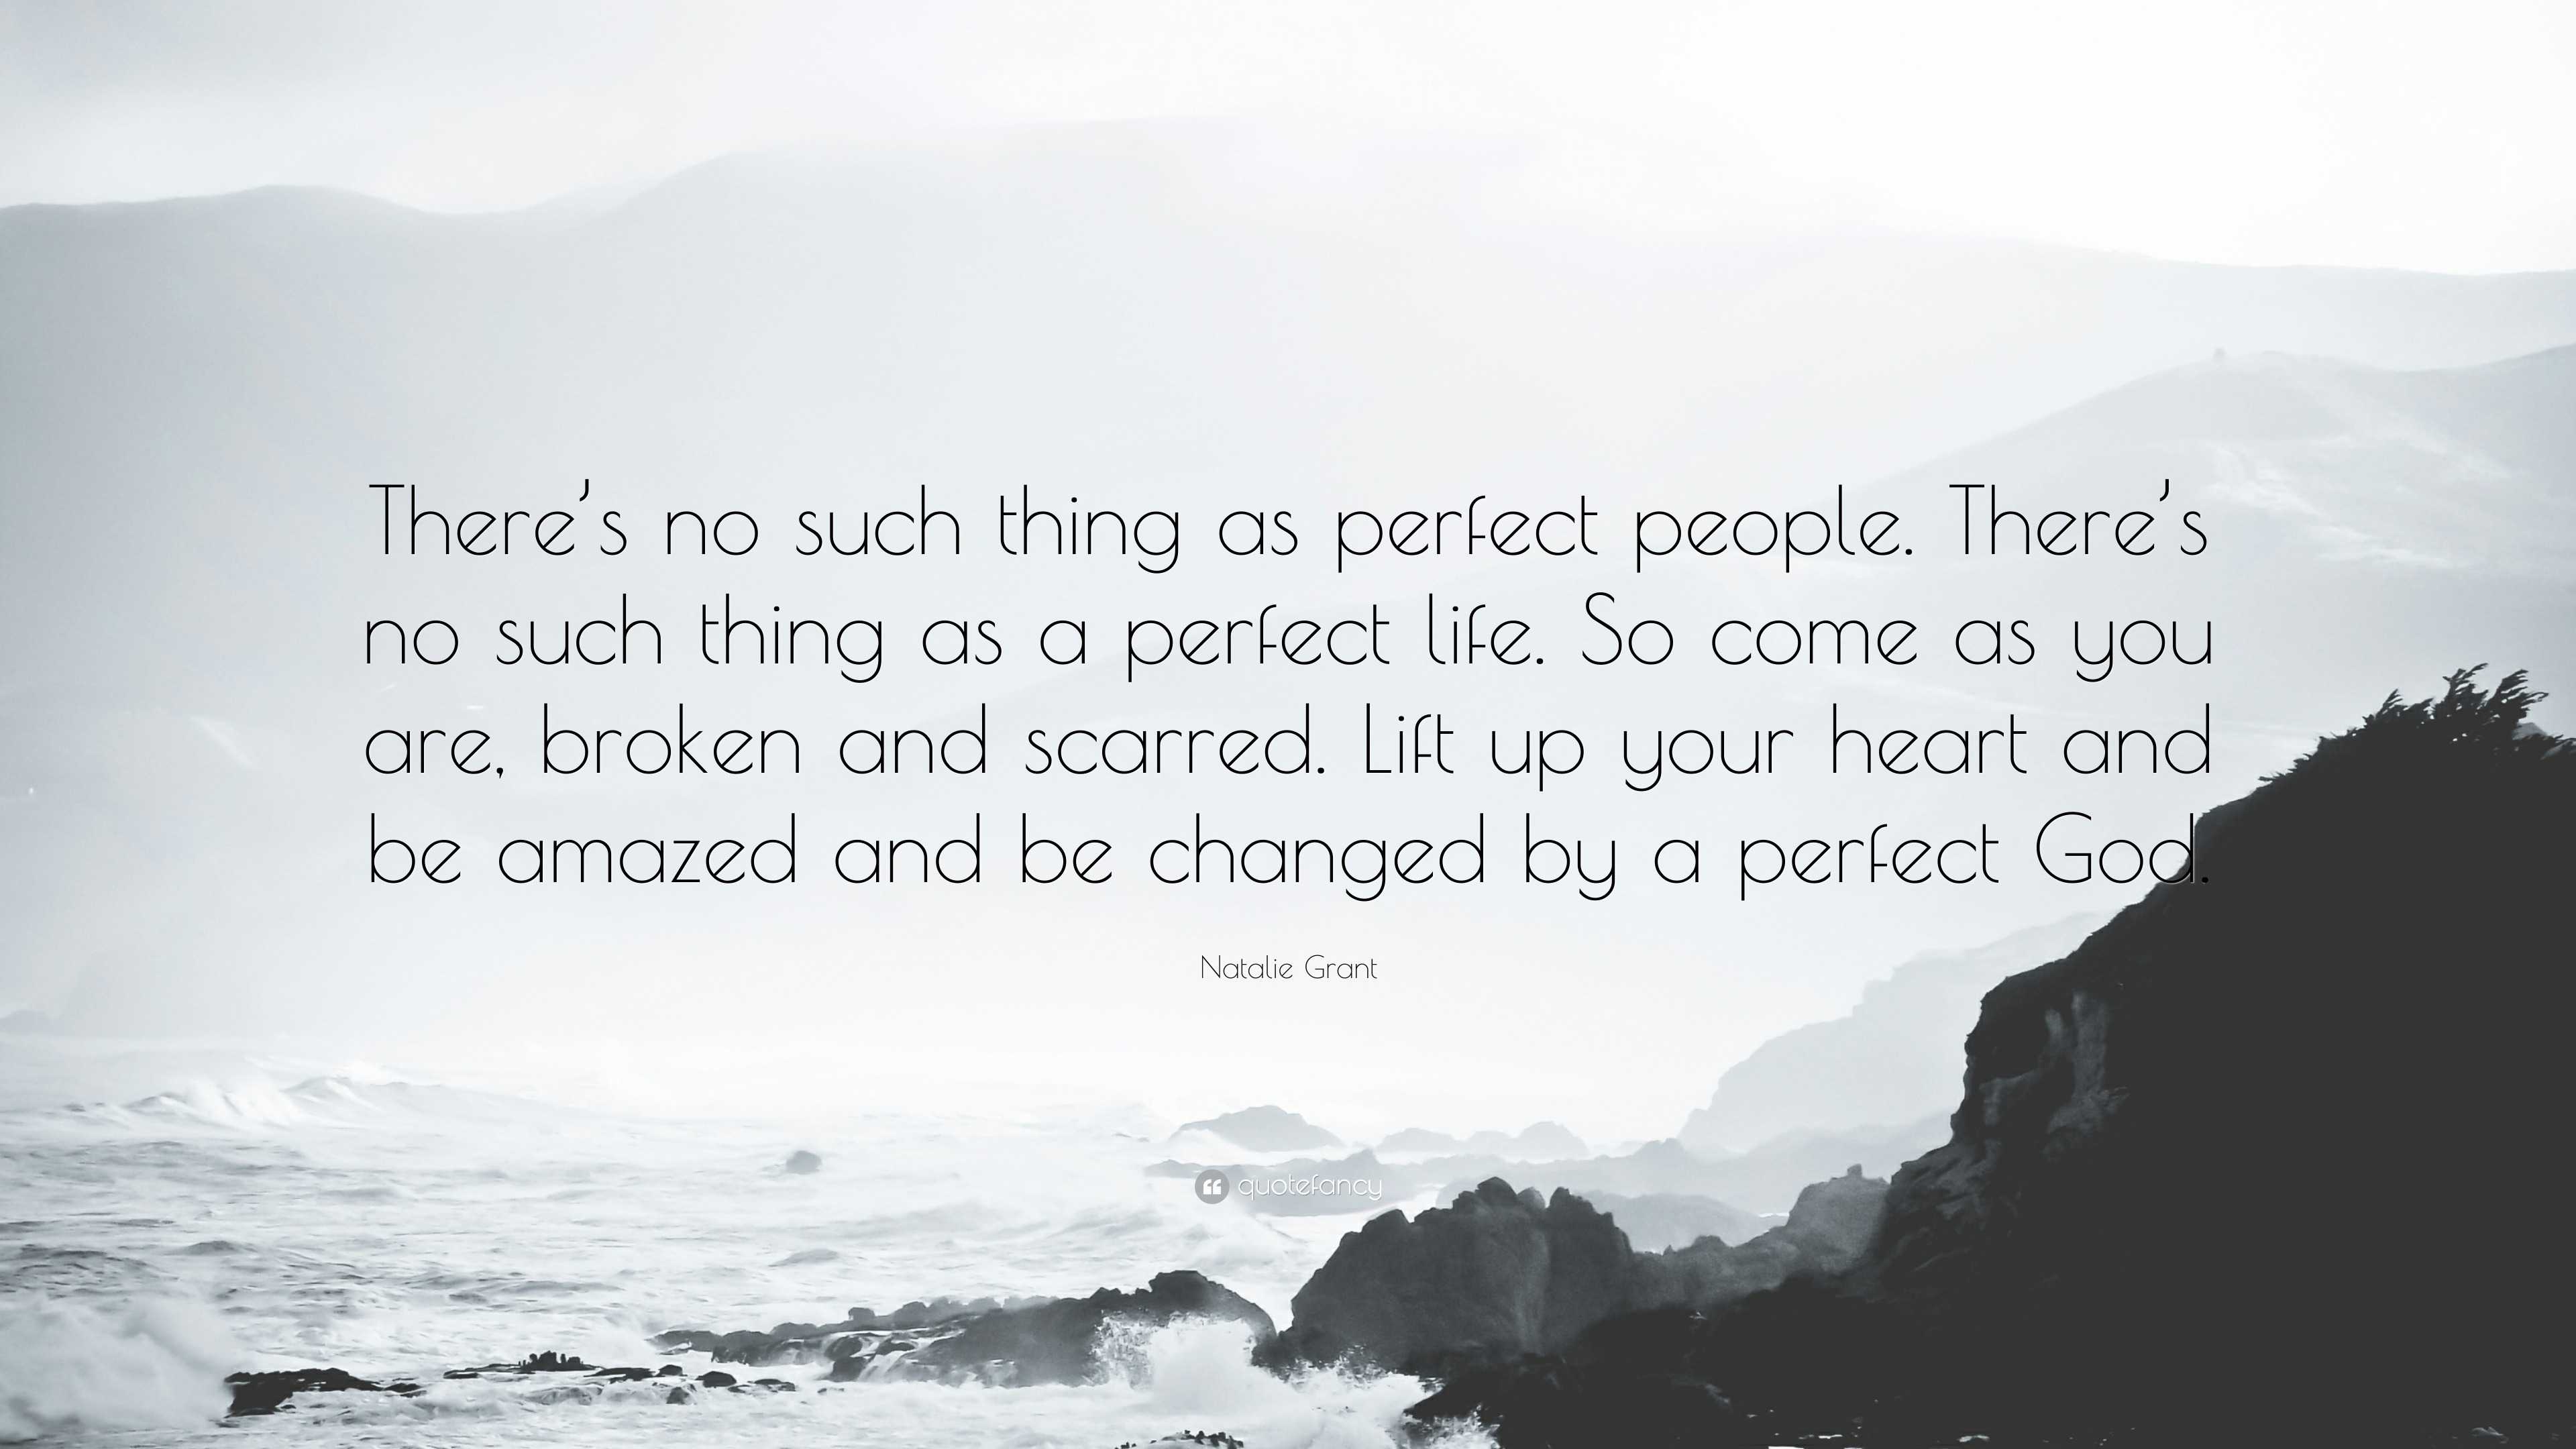 Natalie Grant Quote “There s no such thing as perfect people There s no such